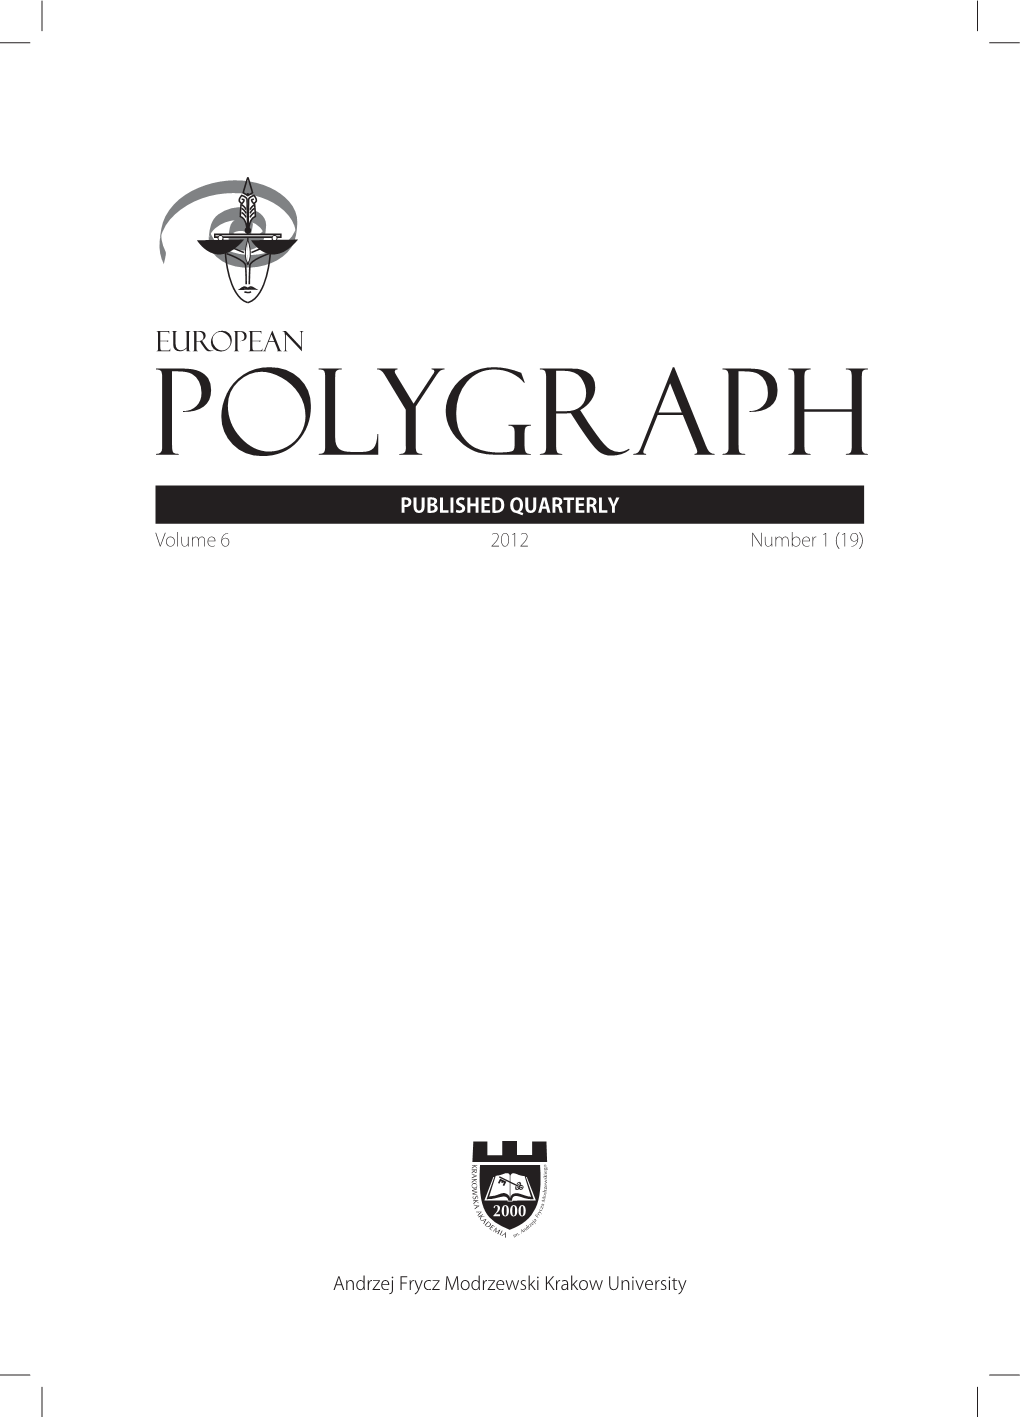 The Use of the Polygraph with Sex Offenders in the UK